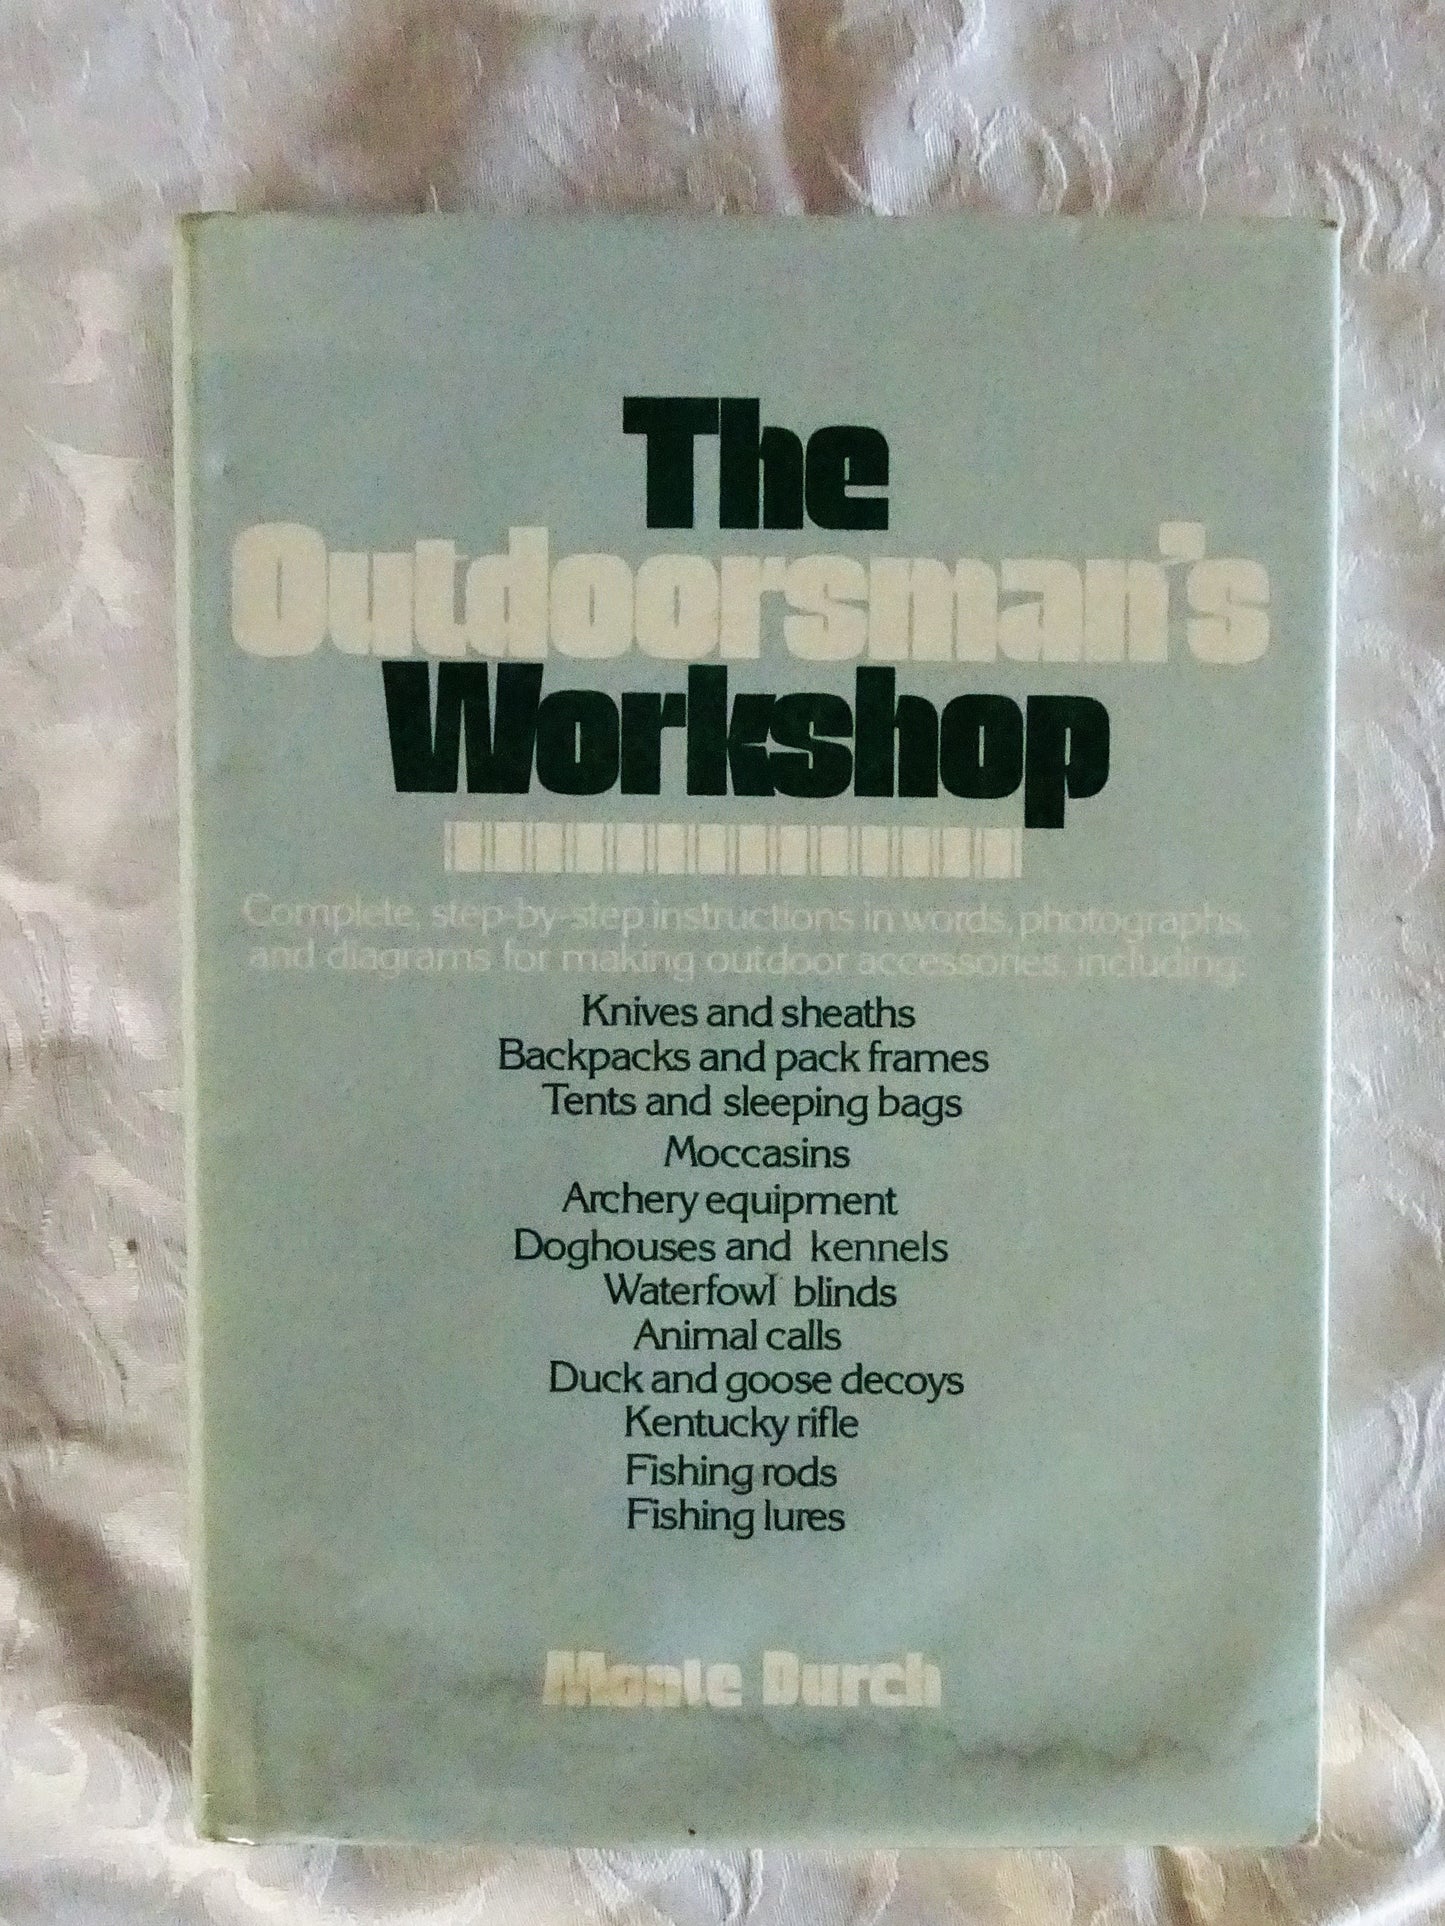 The Outdoorman's Workshop by Monte Burch